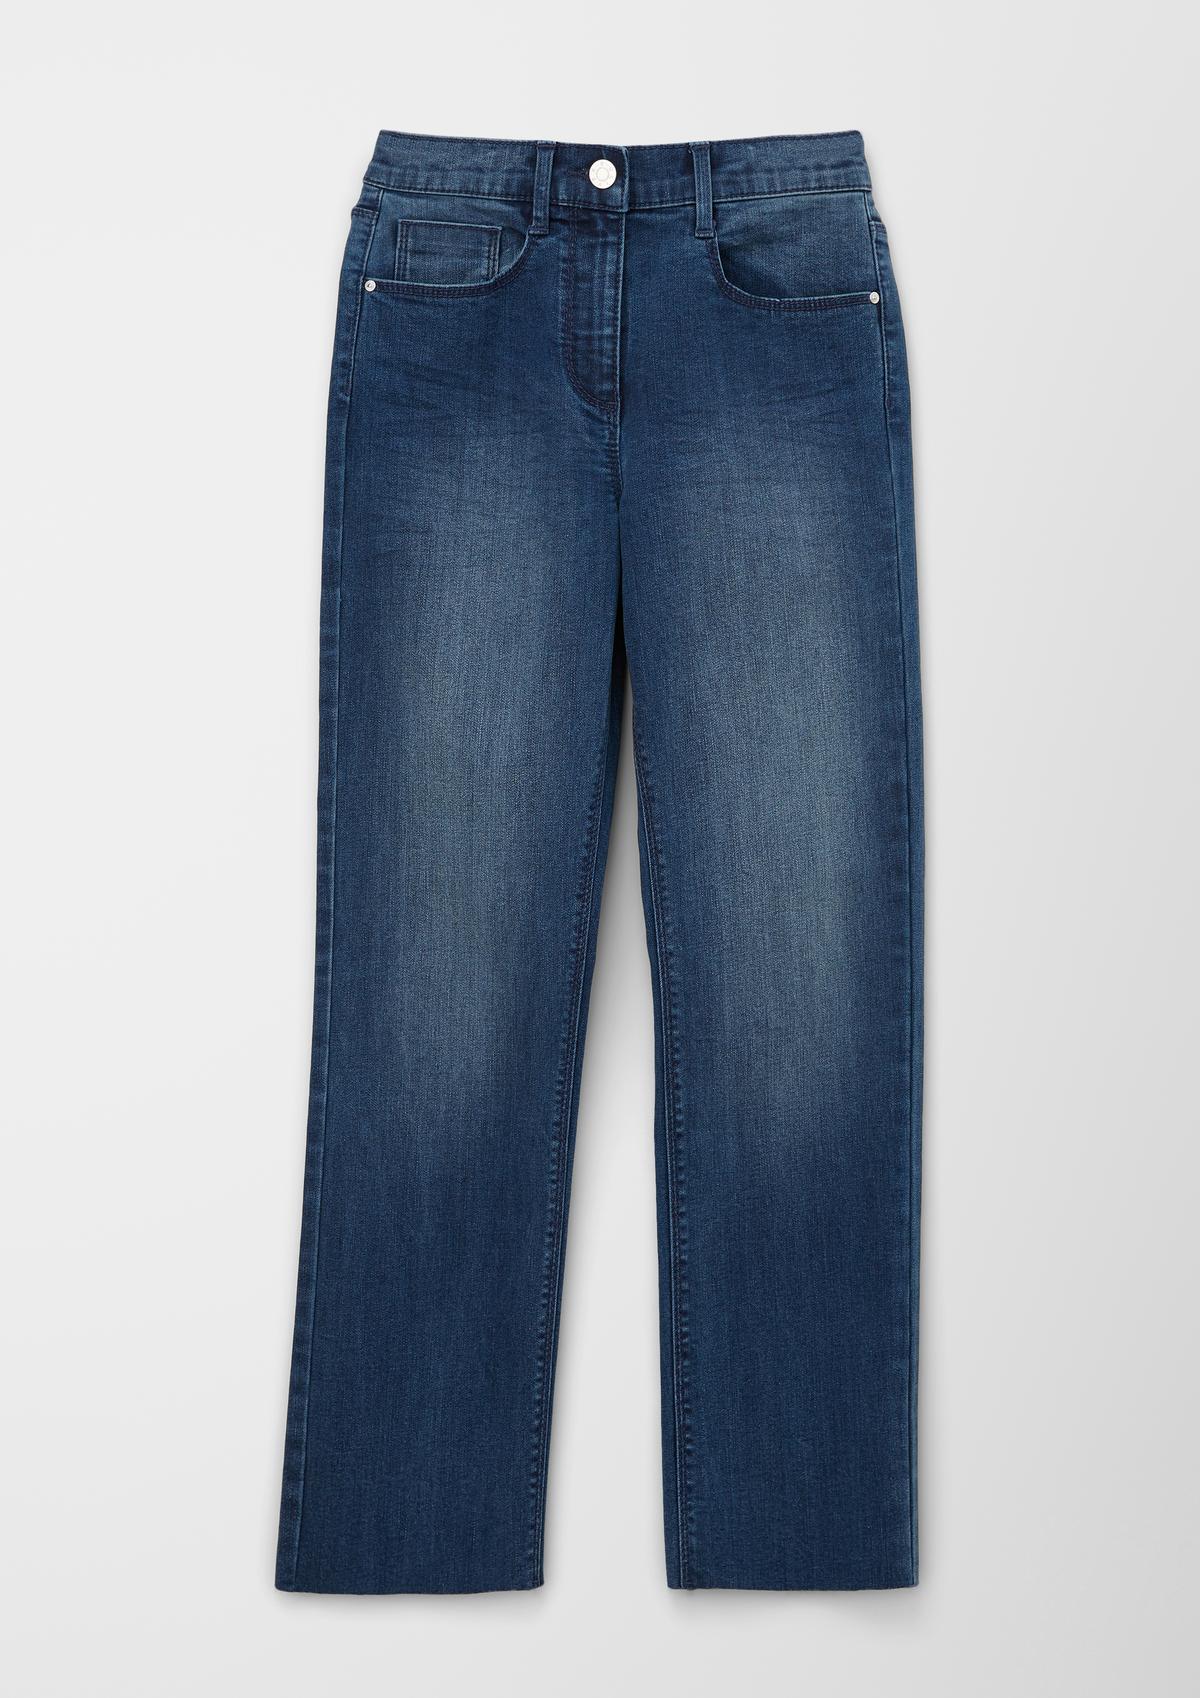 Ankle-Jeans / Regular Fit / Mid Rise / Straight Leg